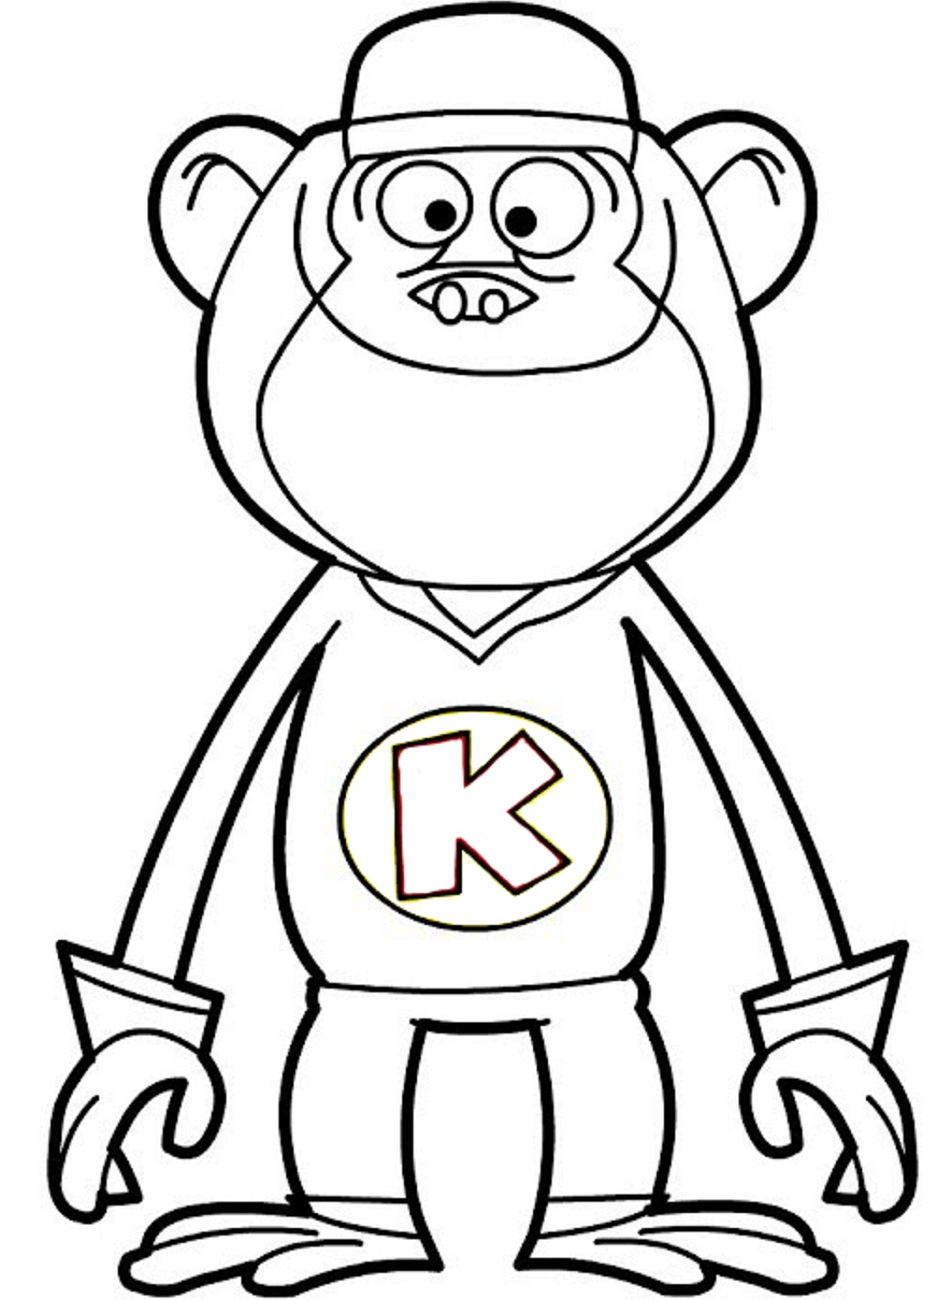 Keymon Ache Coloring Pages - Free Printable Coloring Pages for Kids